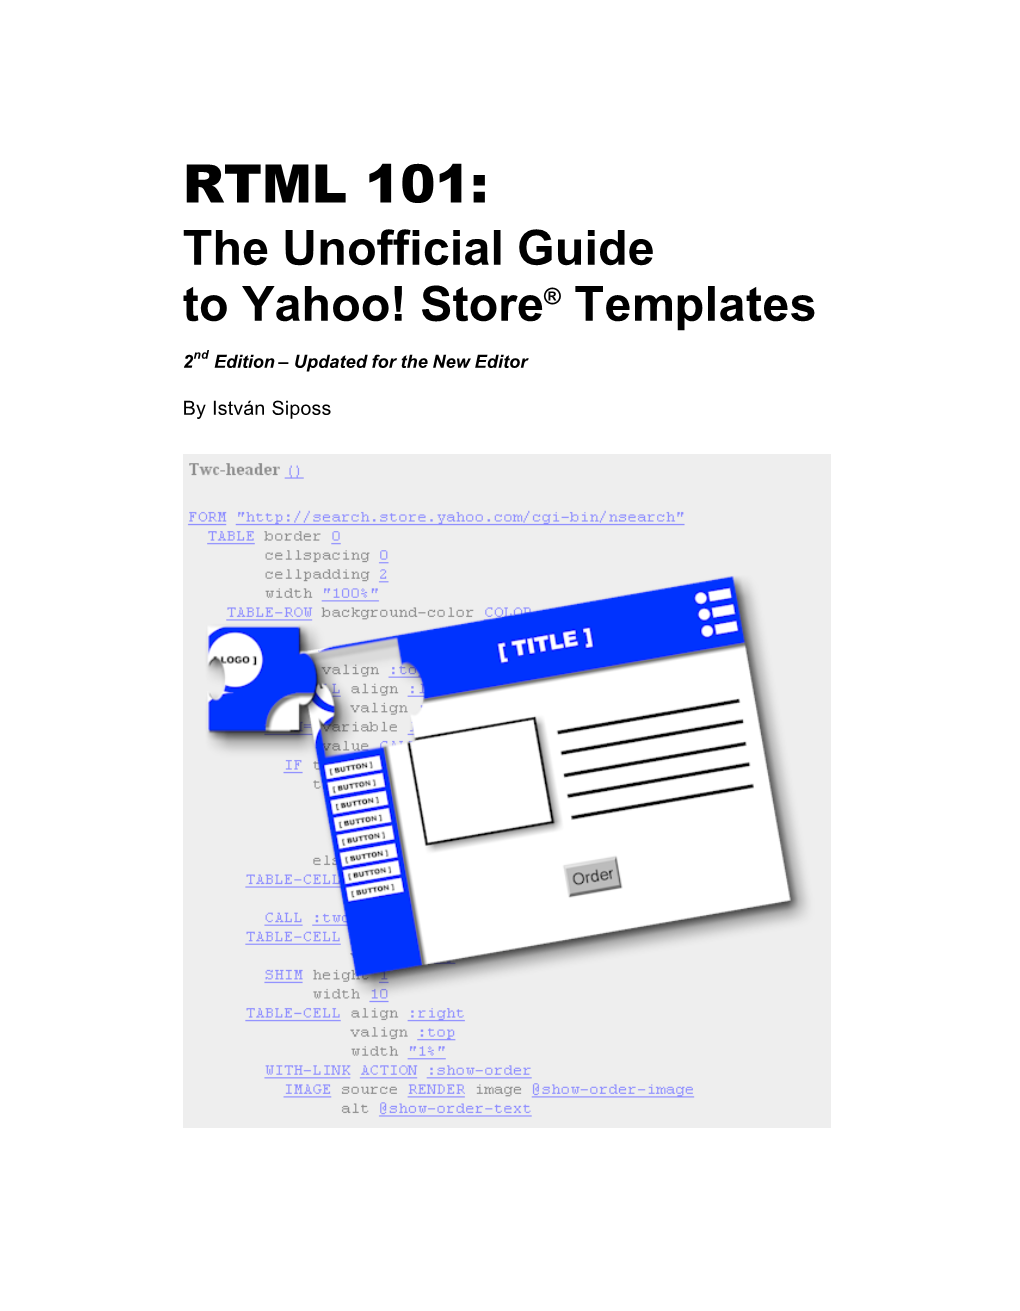 RTML 101: the Unofficial Guide to Yahoo! Store® Templates